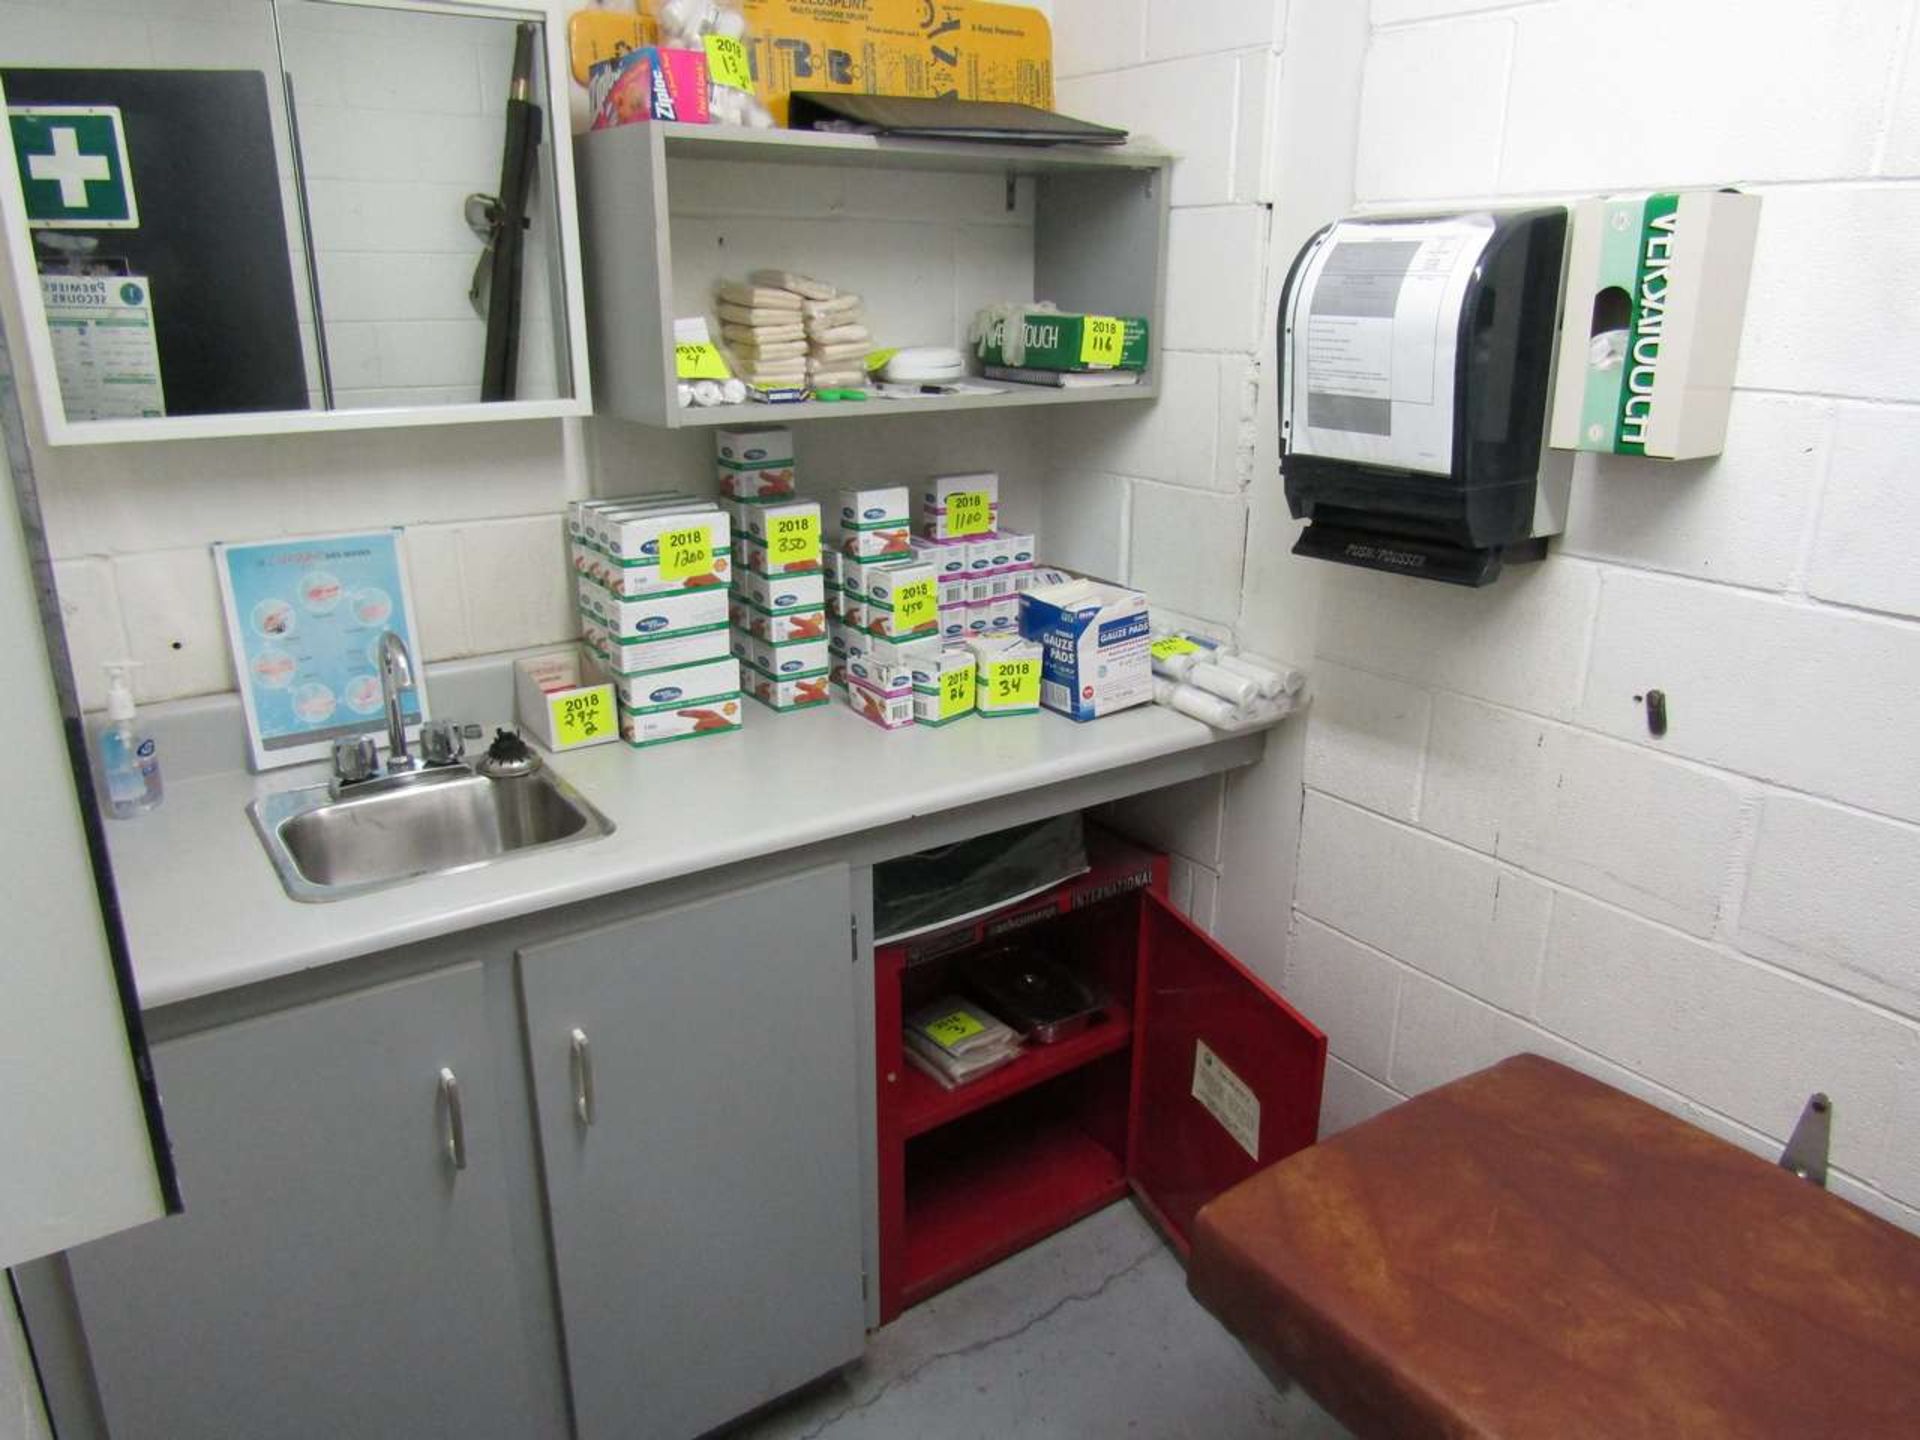 Contents of First aid room